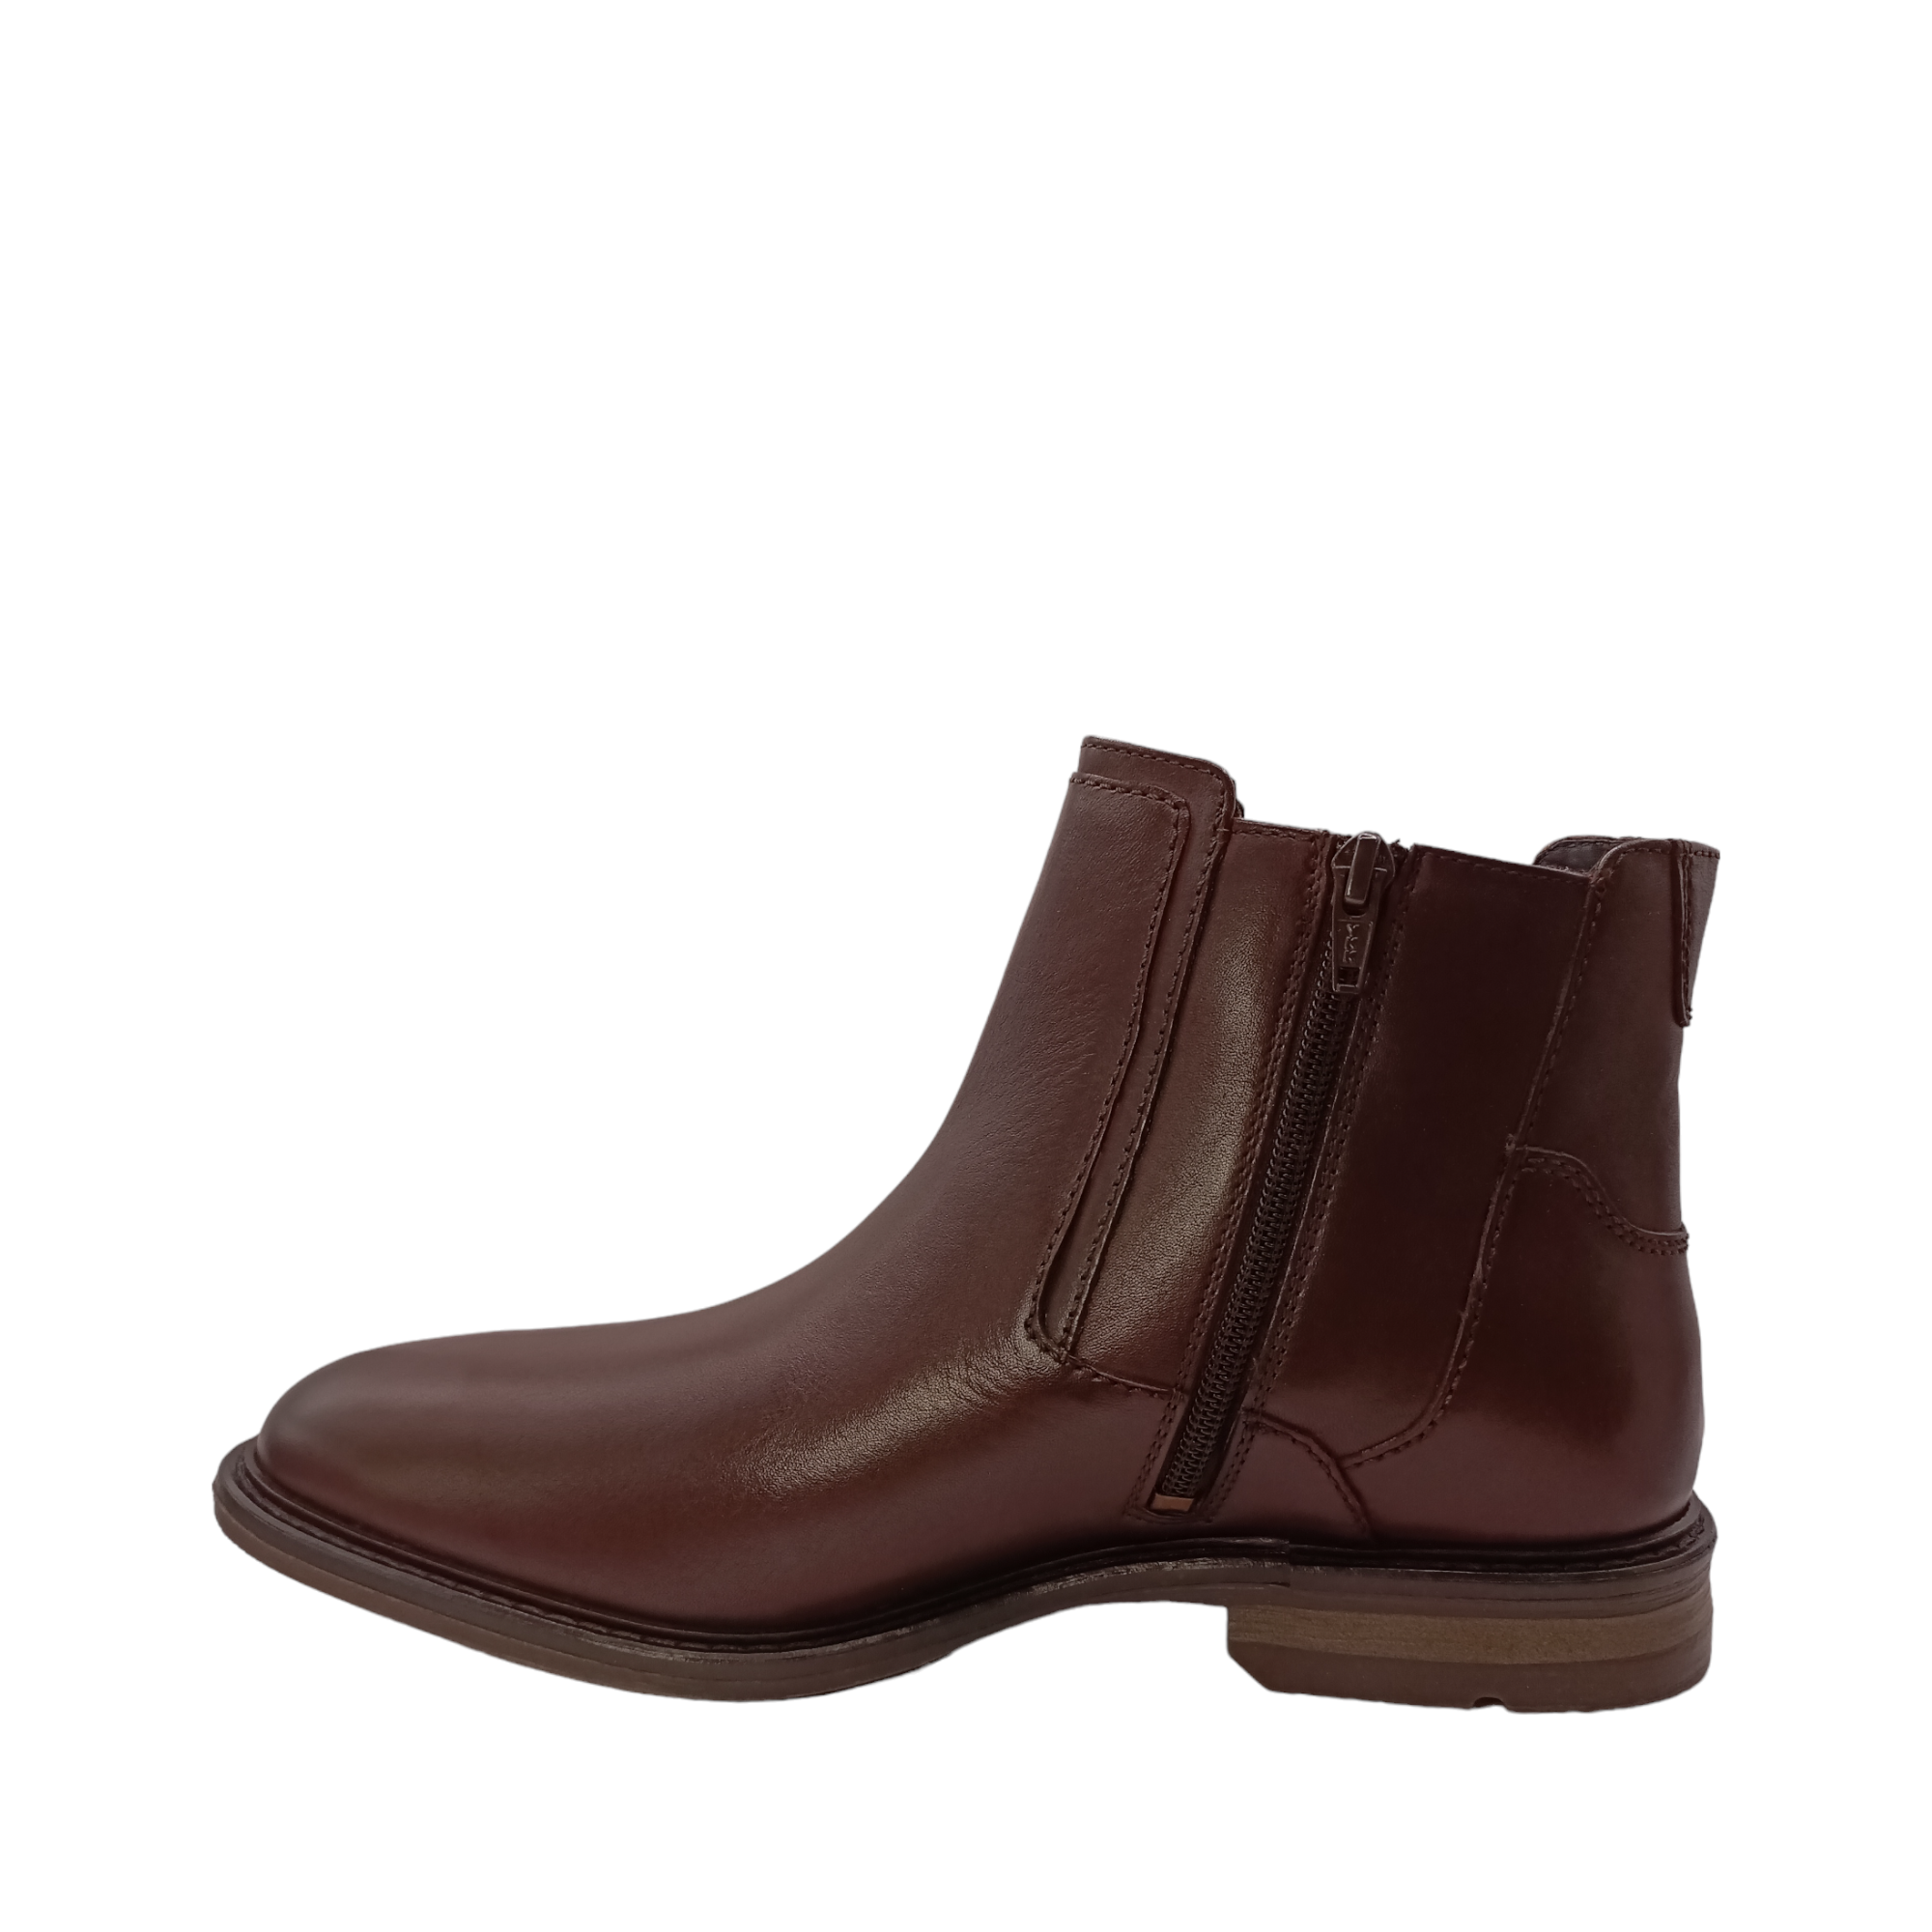 Side angle view with side zip of Earl 08 from Josef Seibel. Brown leather boot with large gusset. Shop online and instore with shoe&amp;me